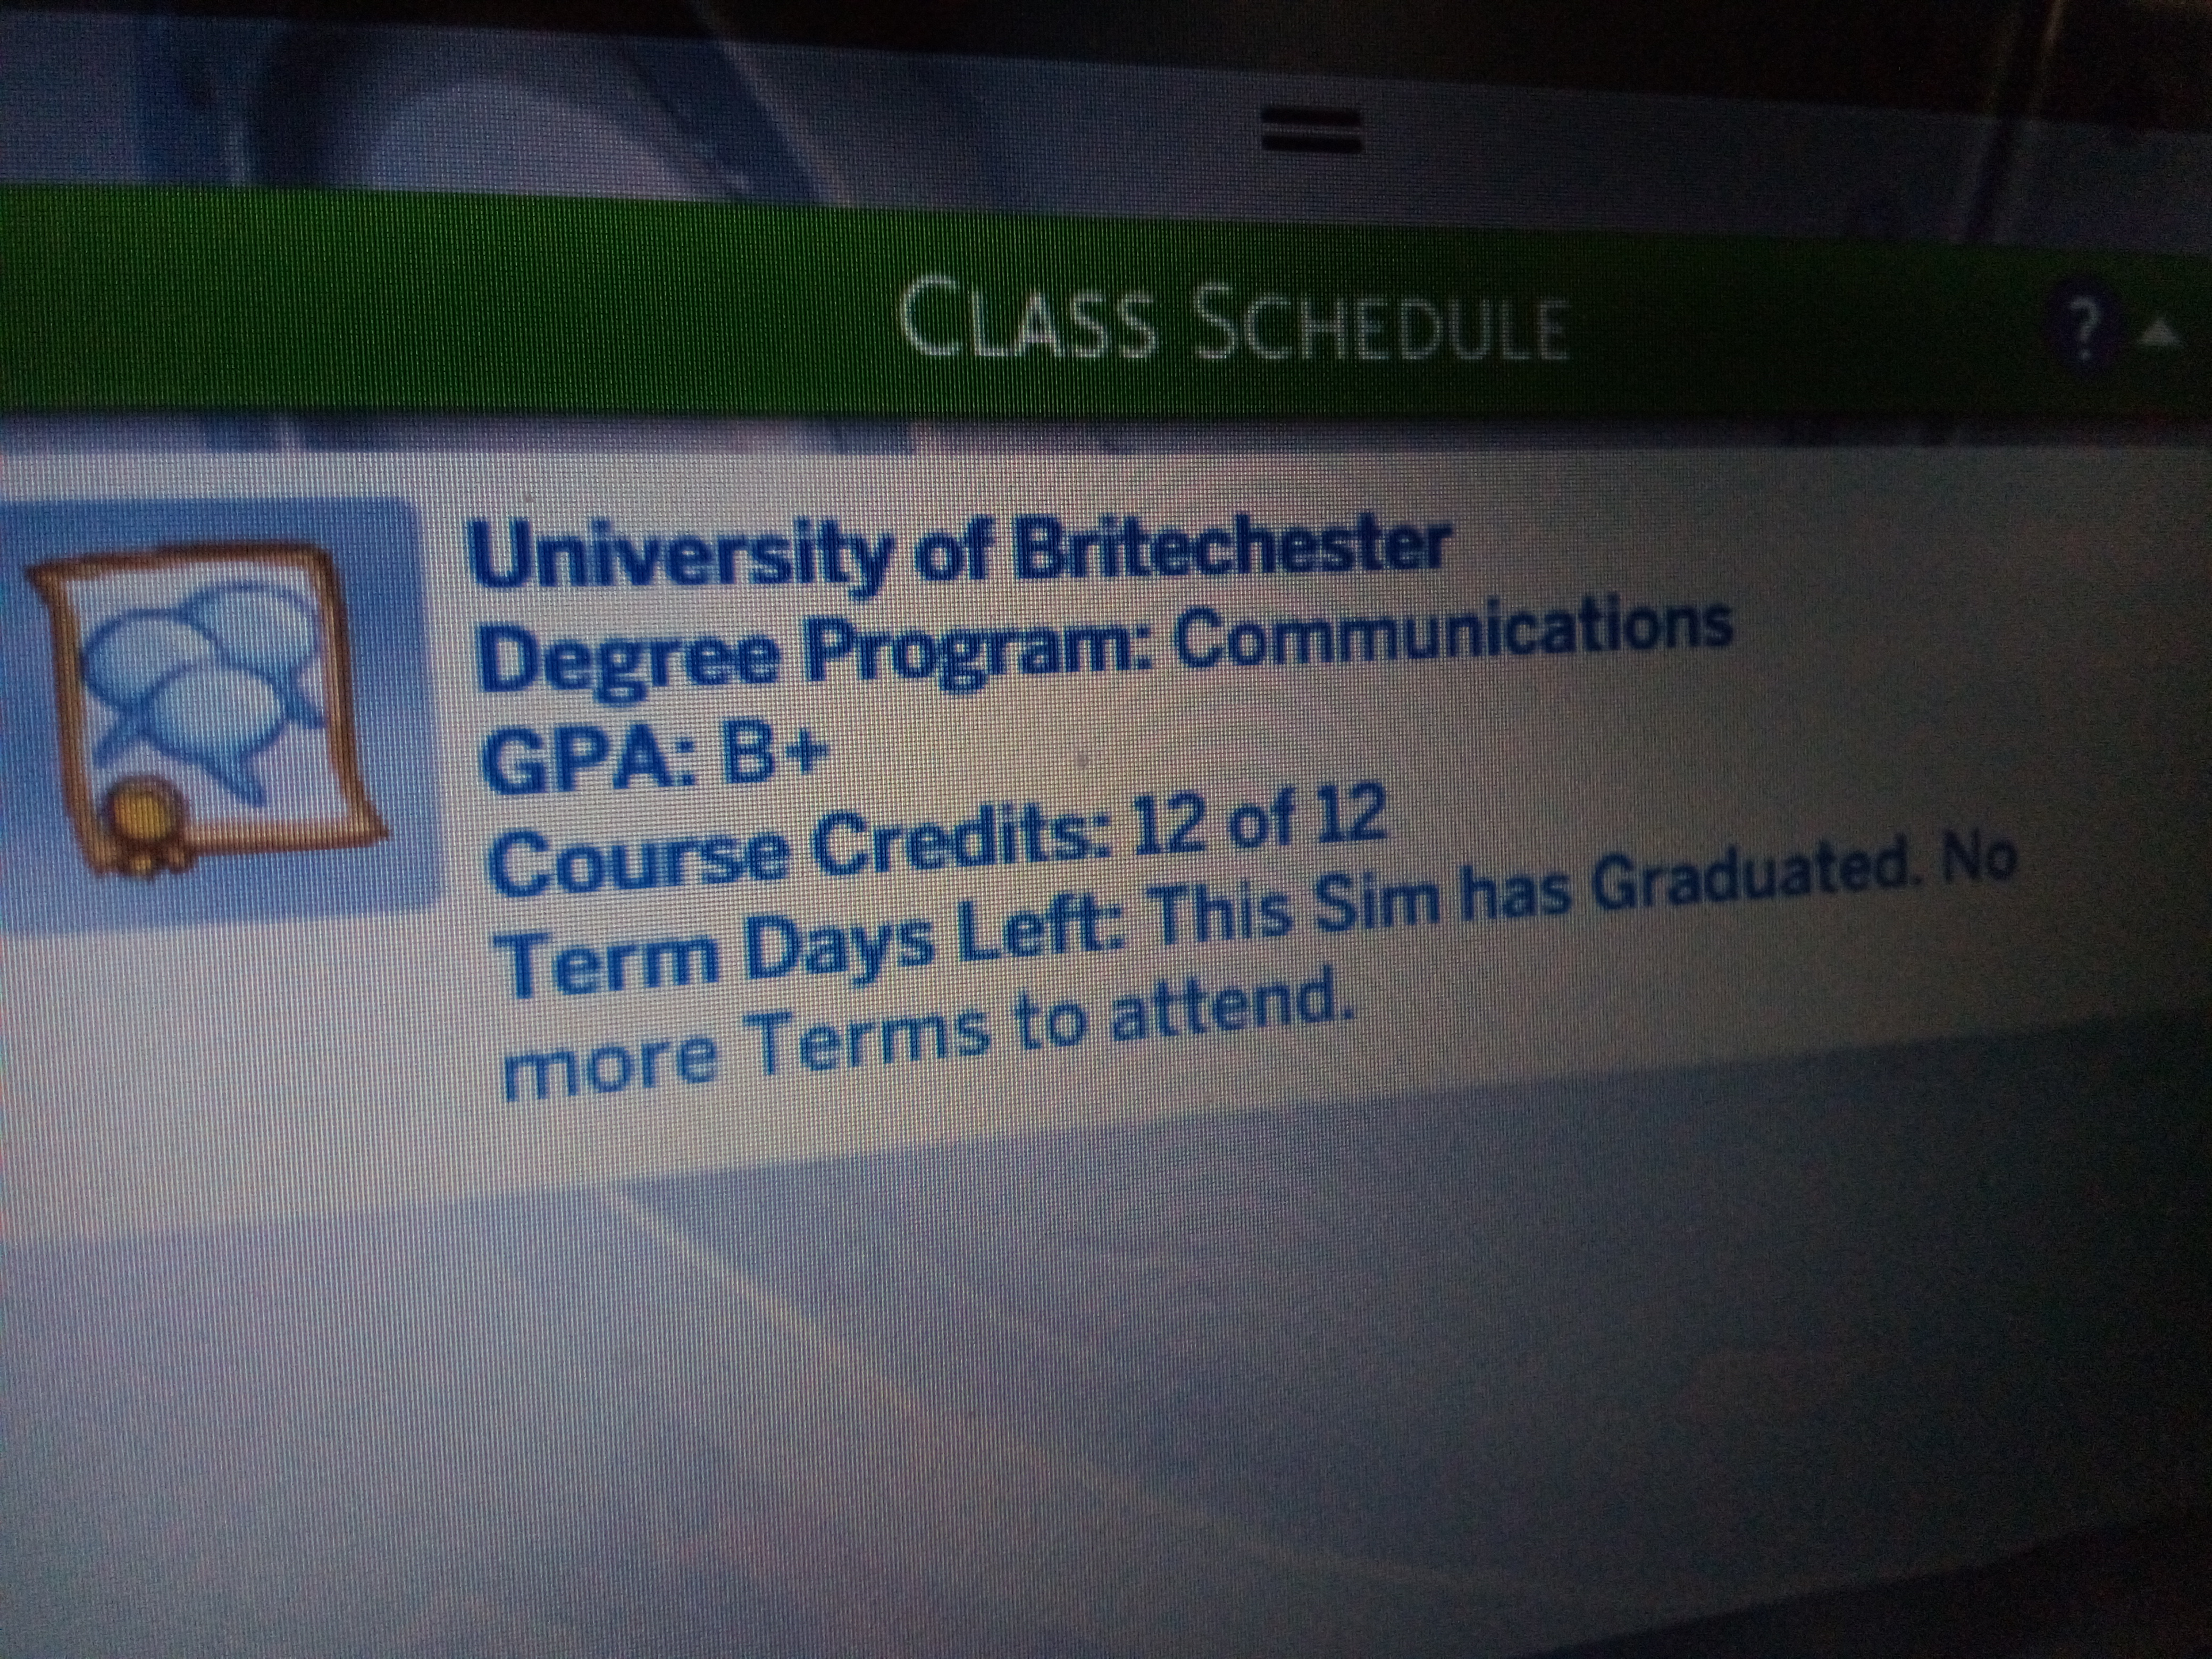 The Sims 4 Discover University Cheats: Graduation & Degrees, Skills, Careers